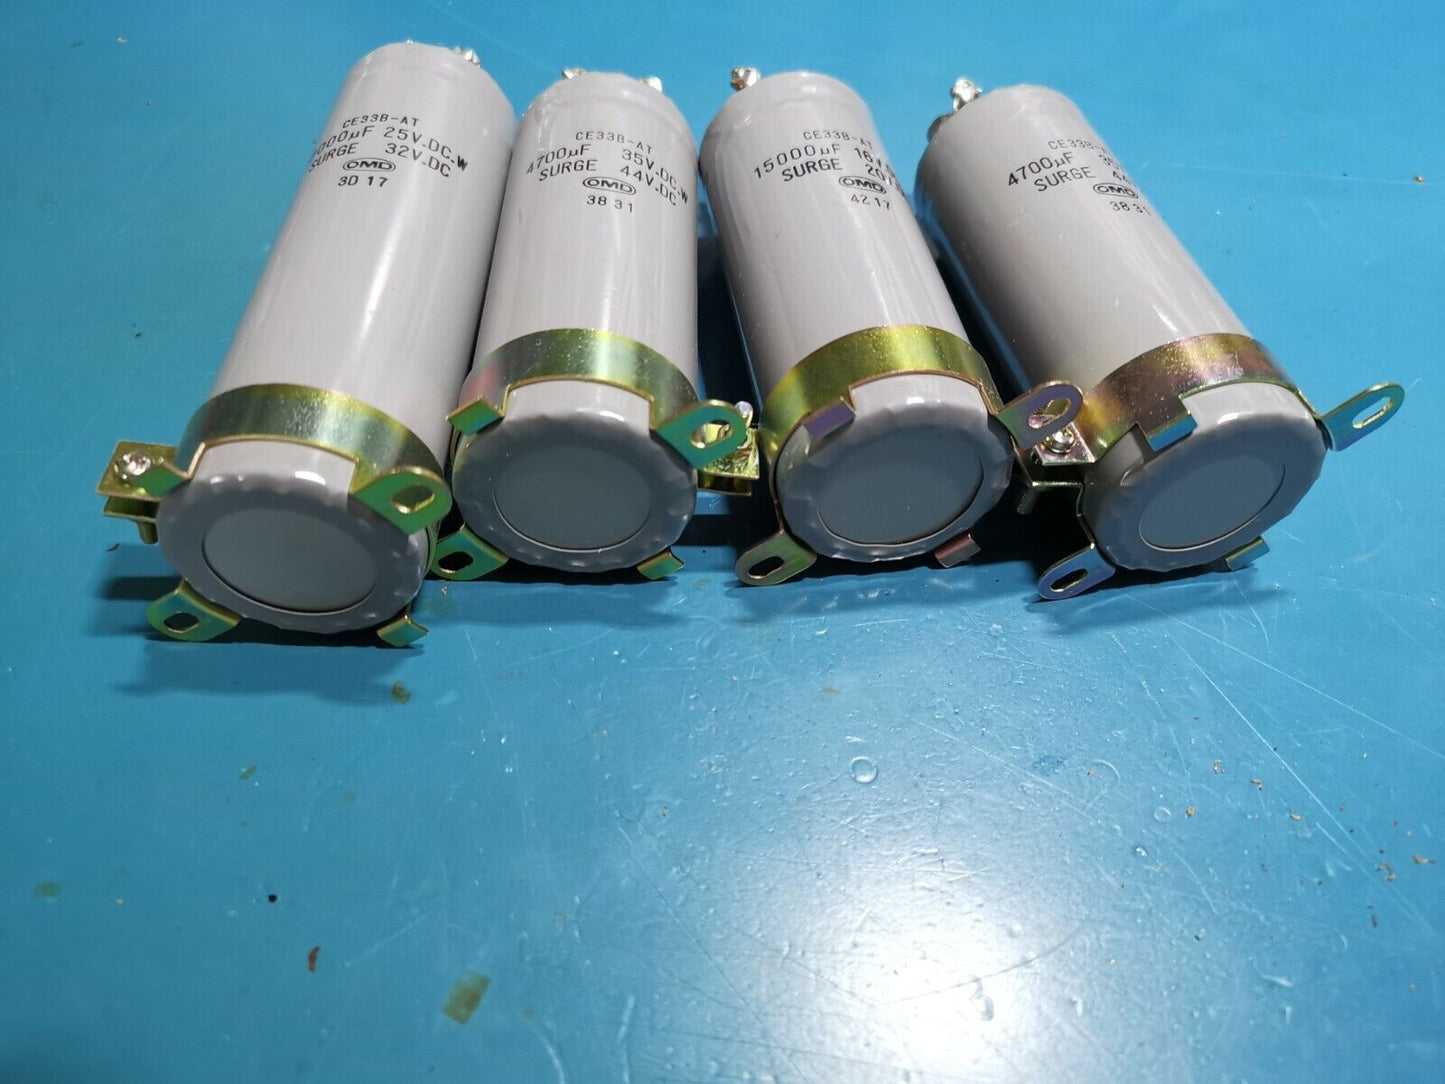 Chassis Mount Electrolytic Capacitors With Mounting Clips